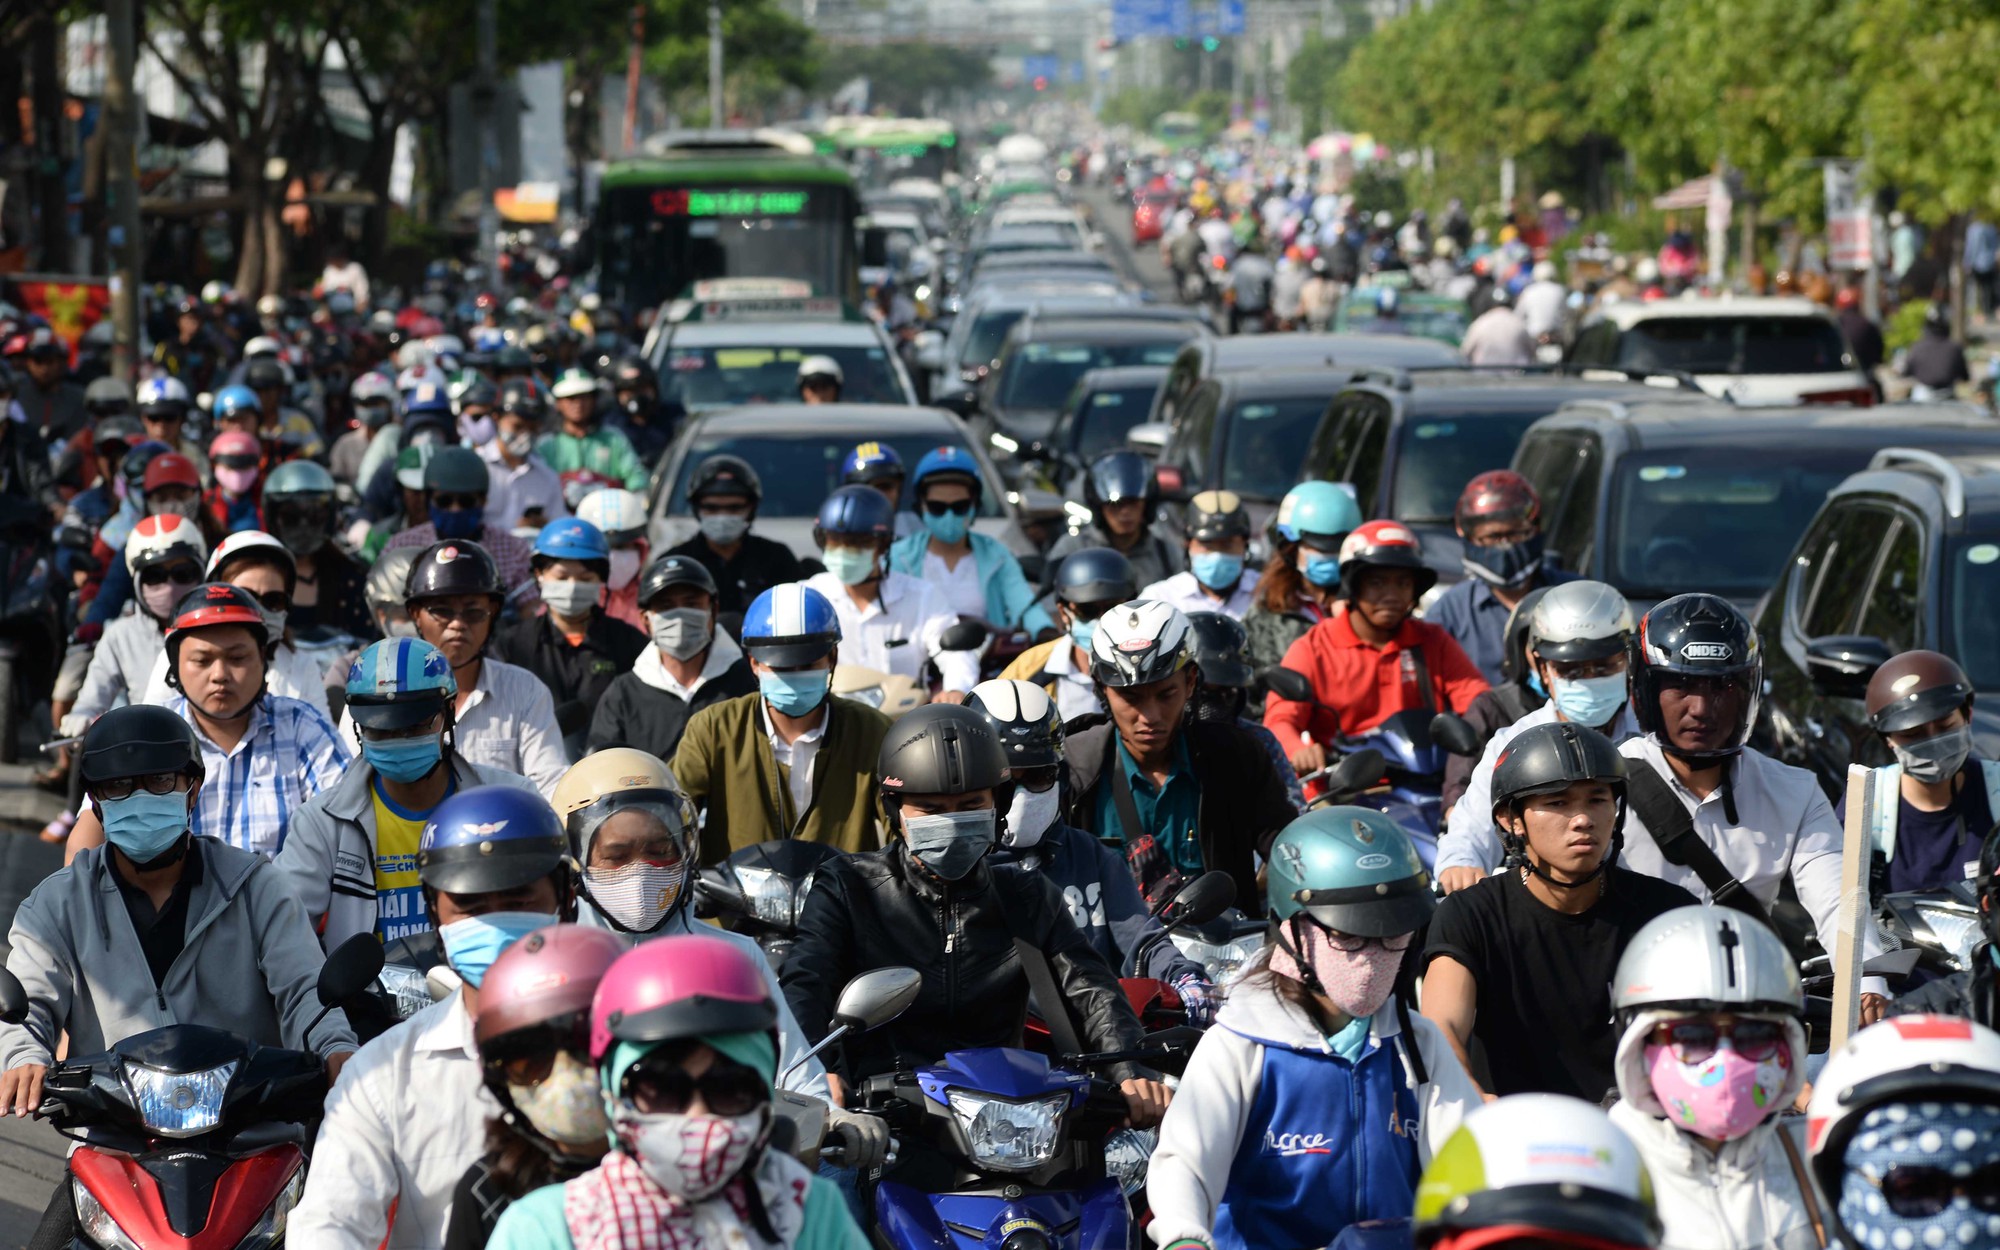 Congestion in southern Ho Chi Minh City requires ‘drastic measures’ to improve traffic infrastructure